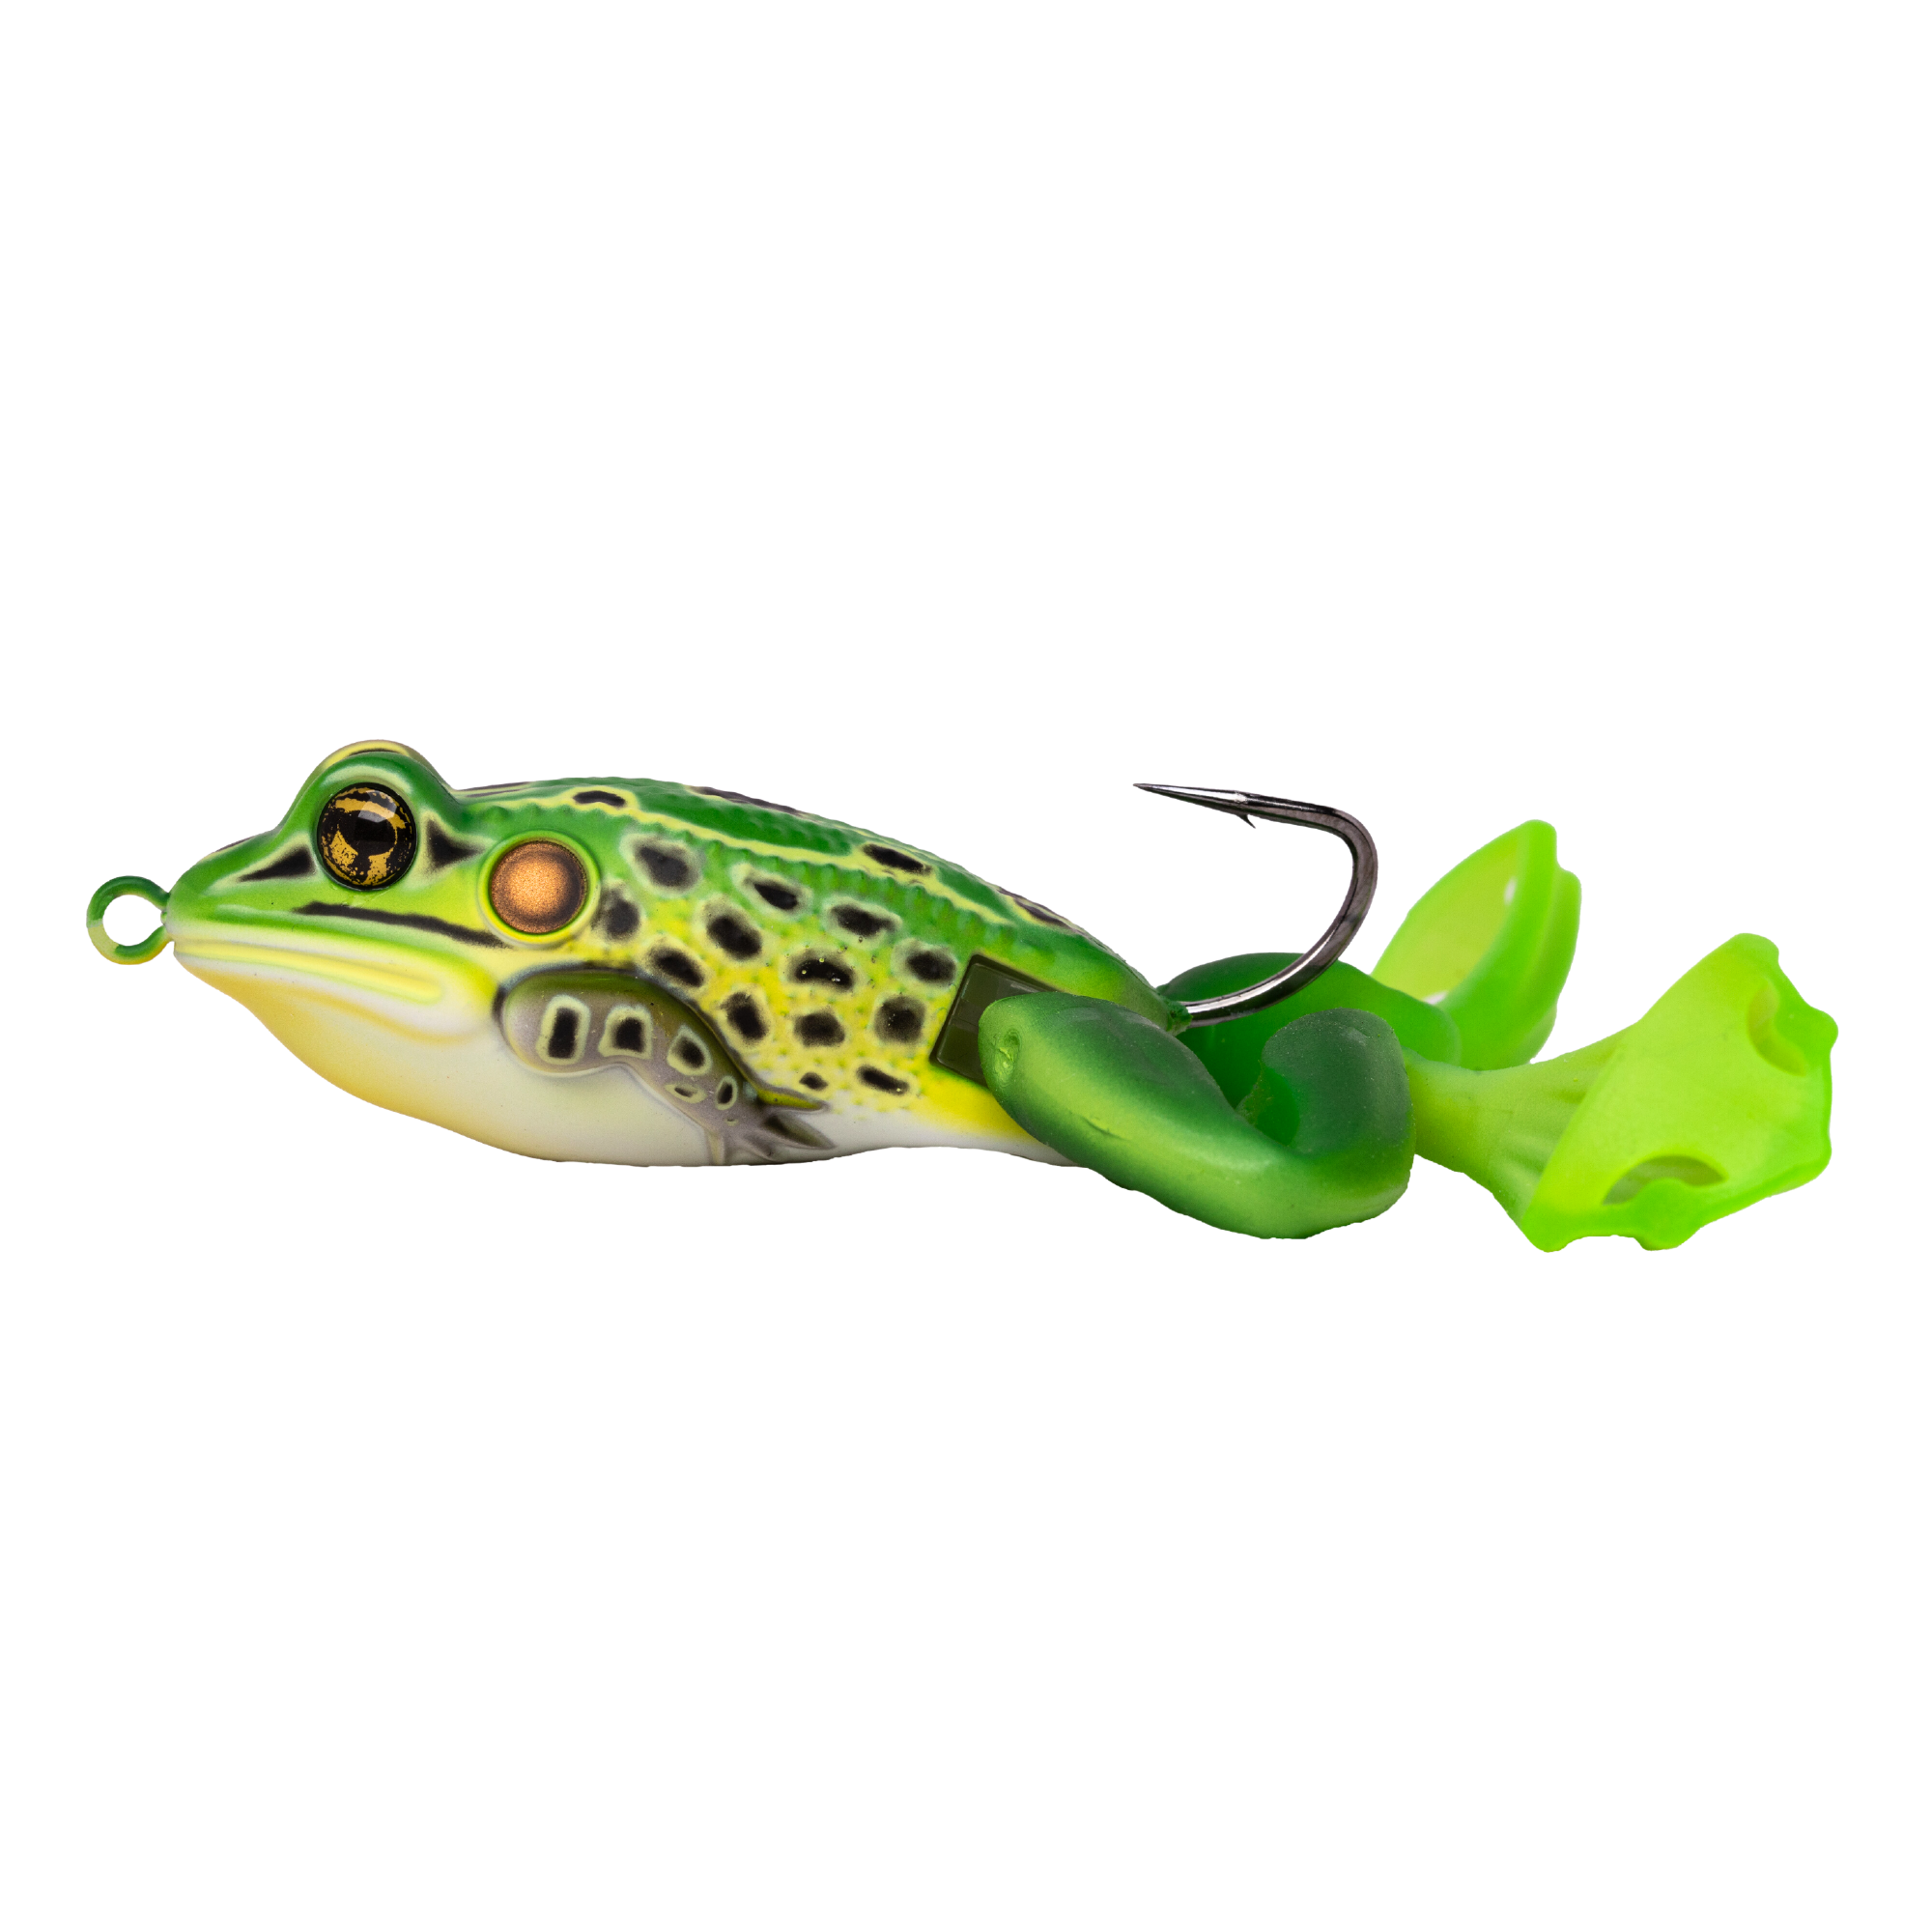 All Freshwater Lures